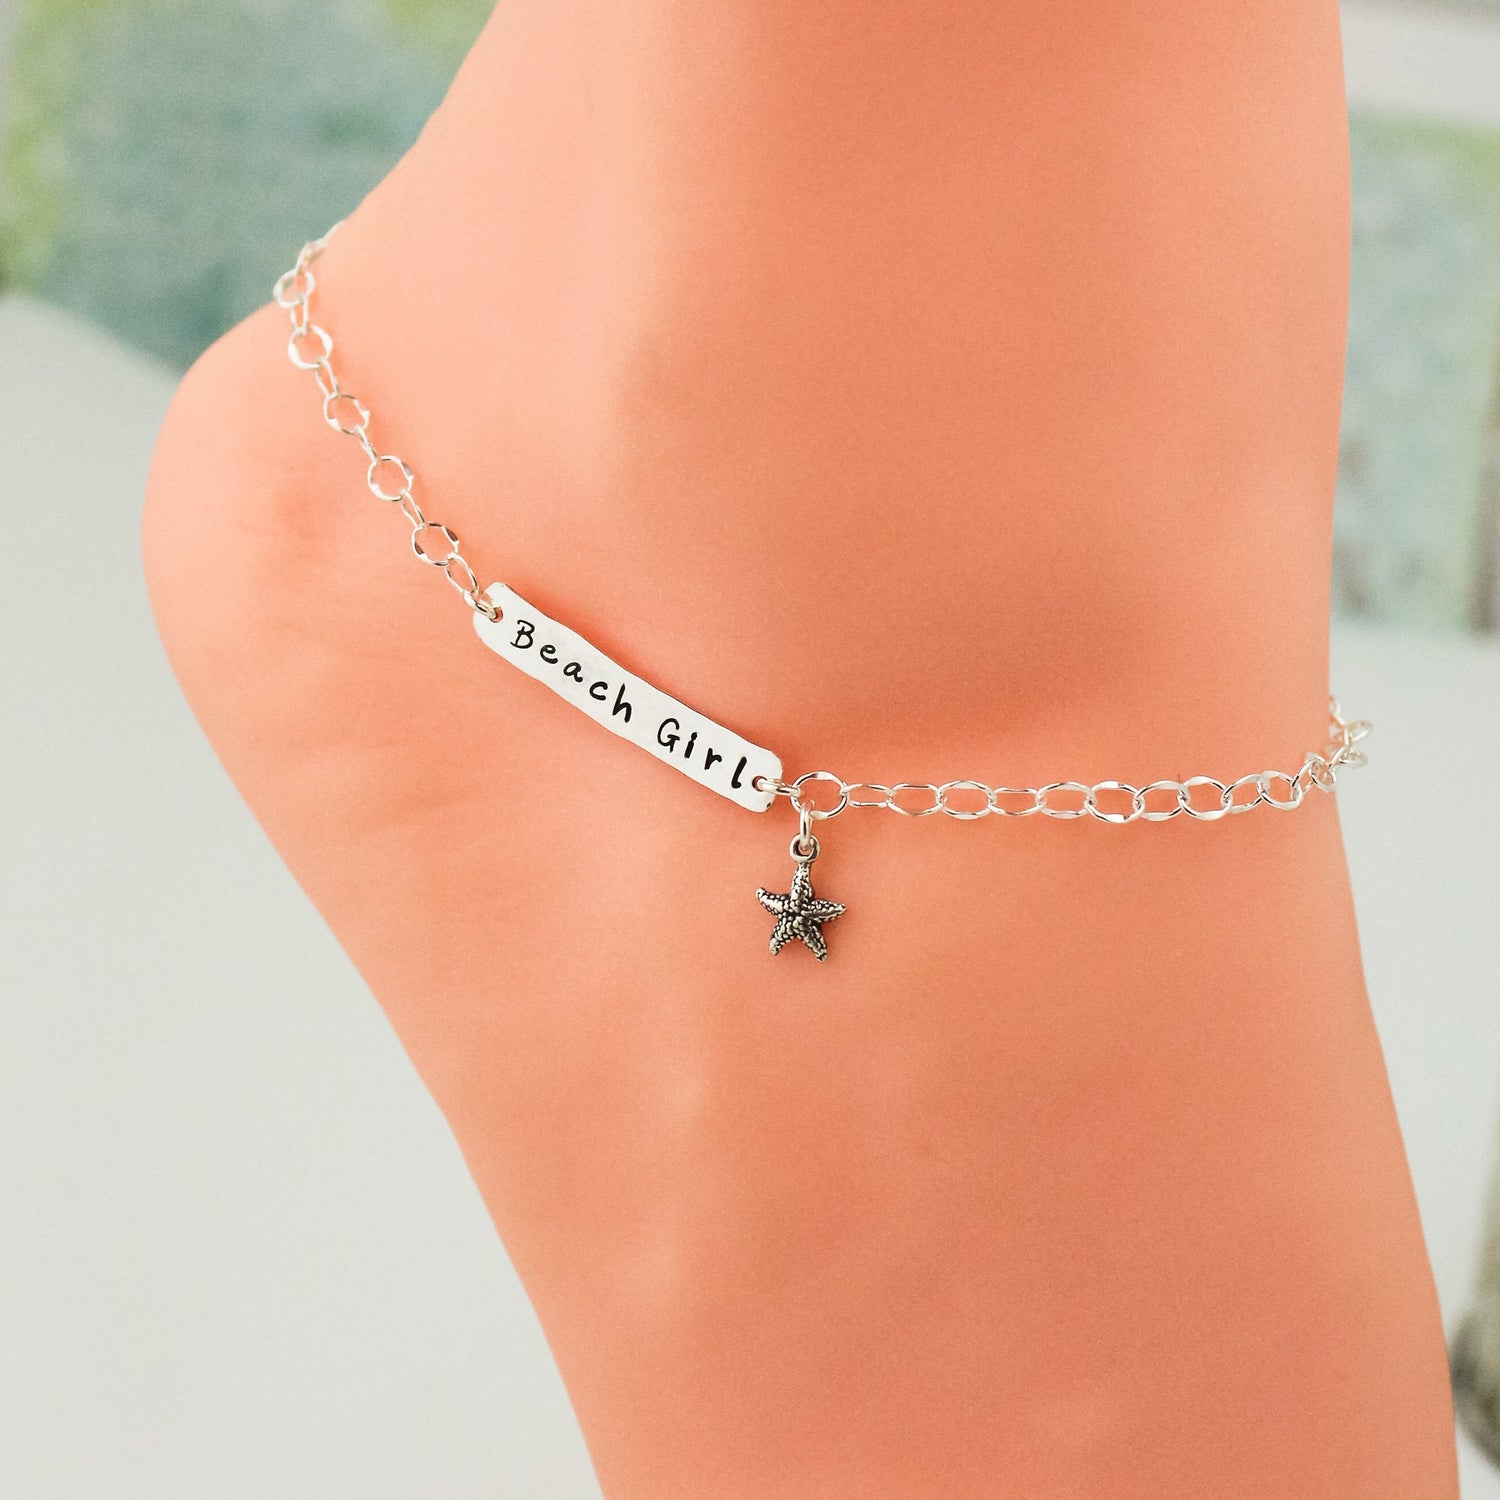 Beach Girl Starfish Anklet, Sterling Silver Starfish Anklet, Starfish Ankle Bracelet, Bridesmaid gift, Beach Wedding, Gifts for Her